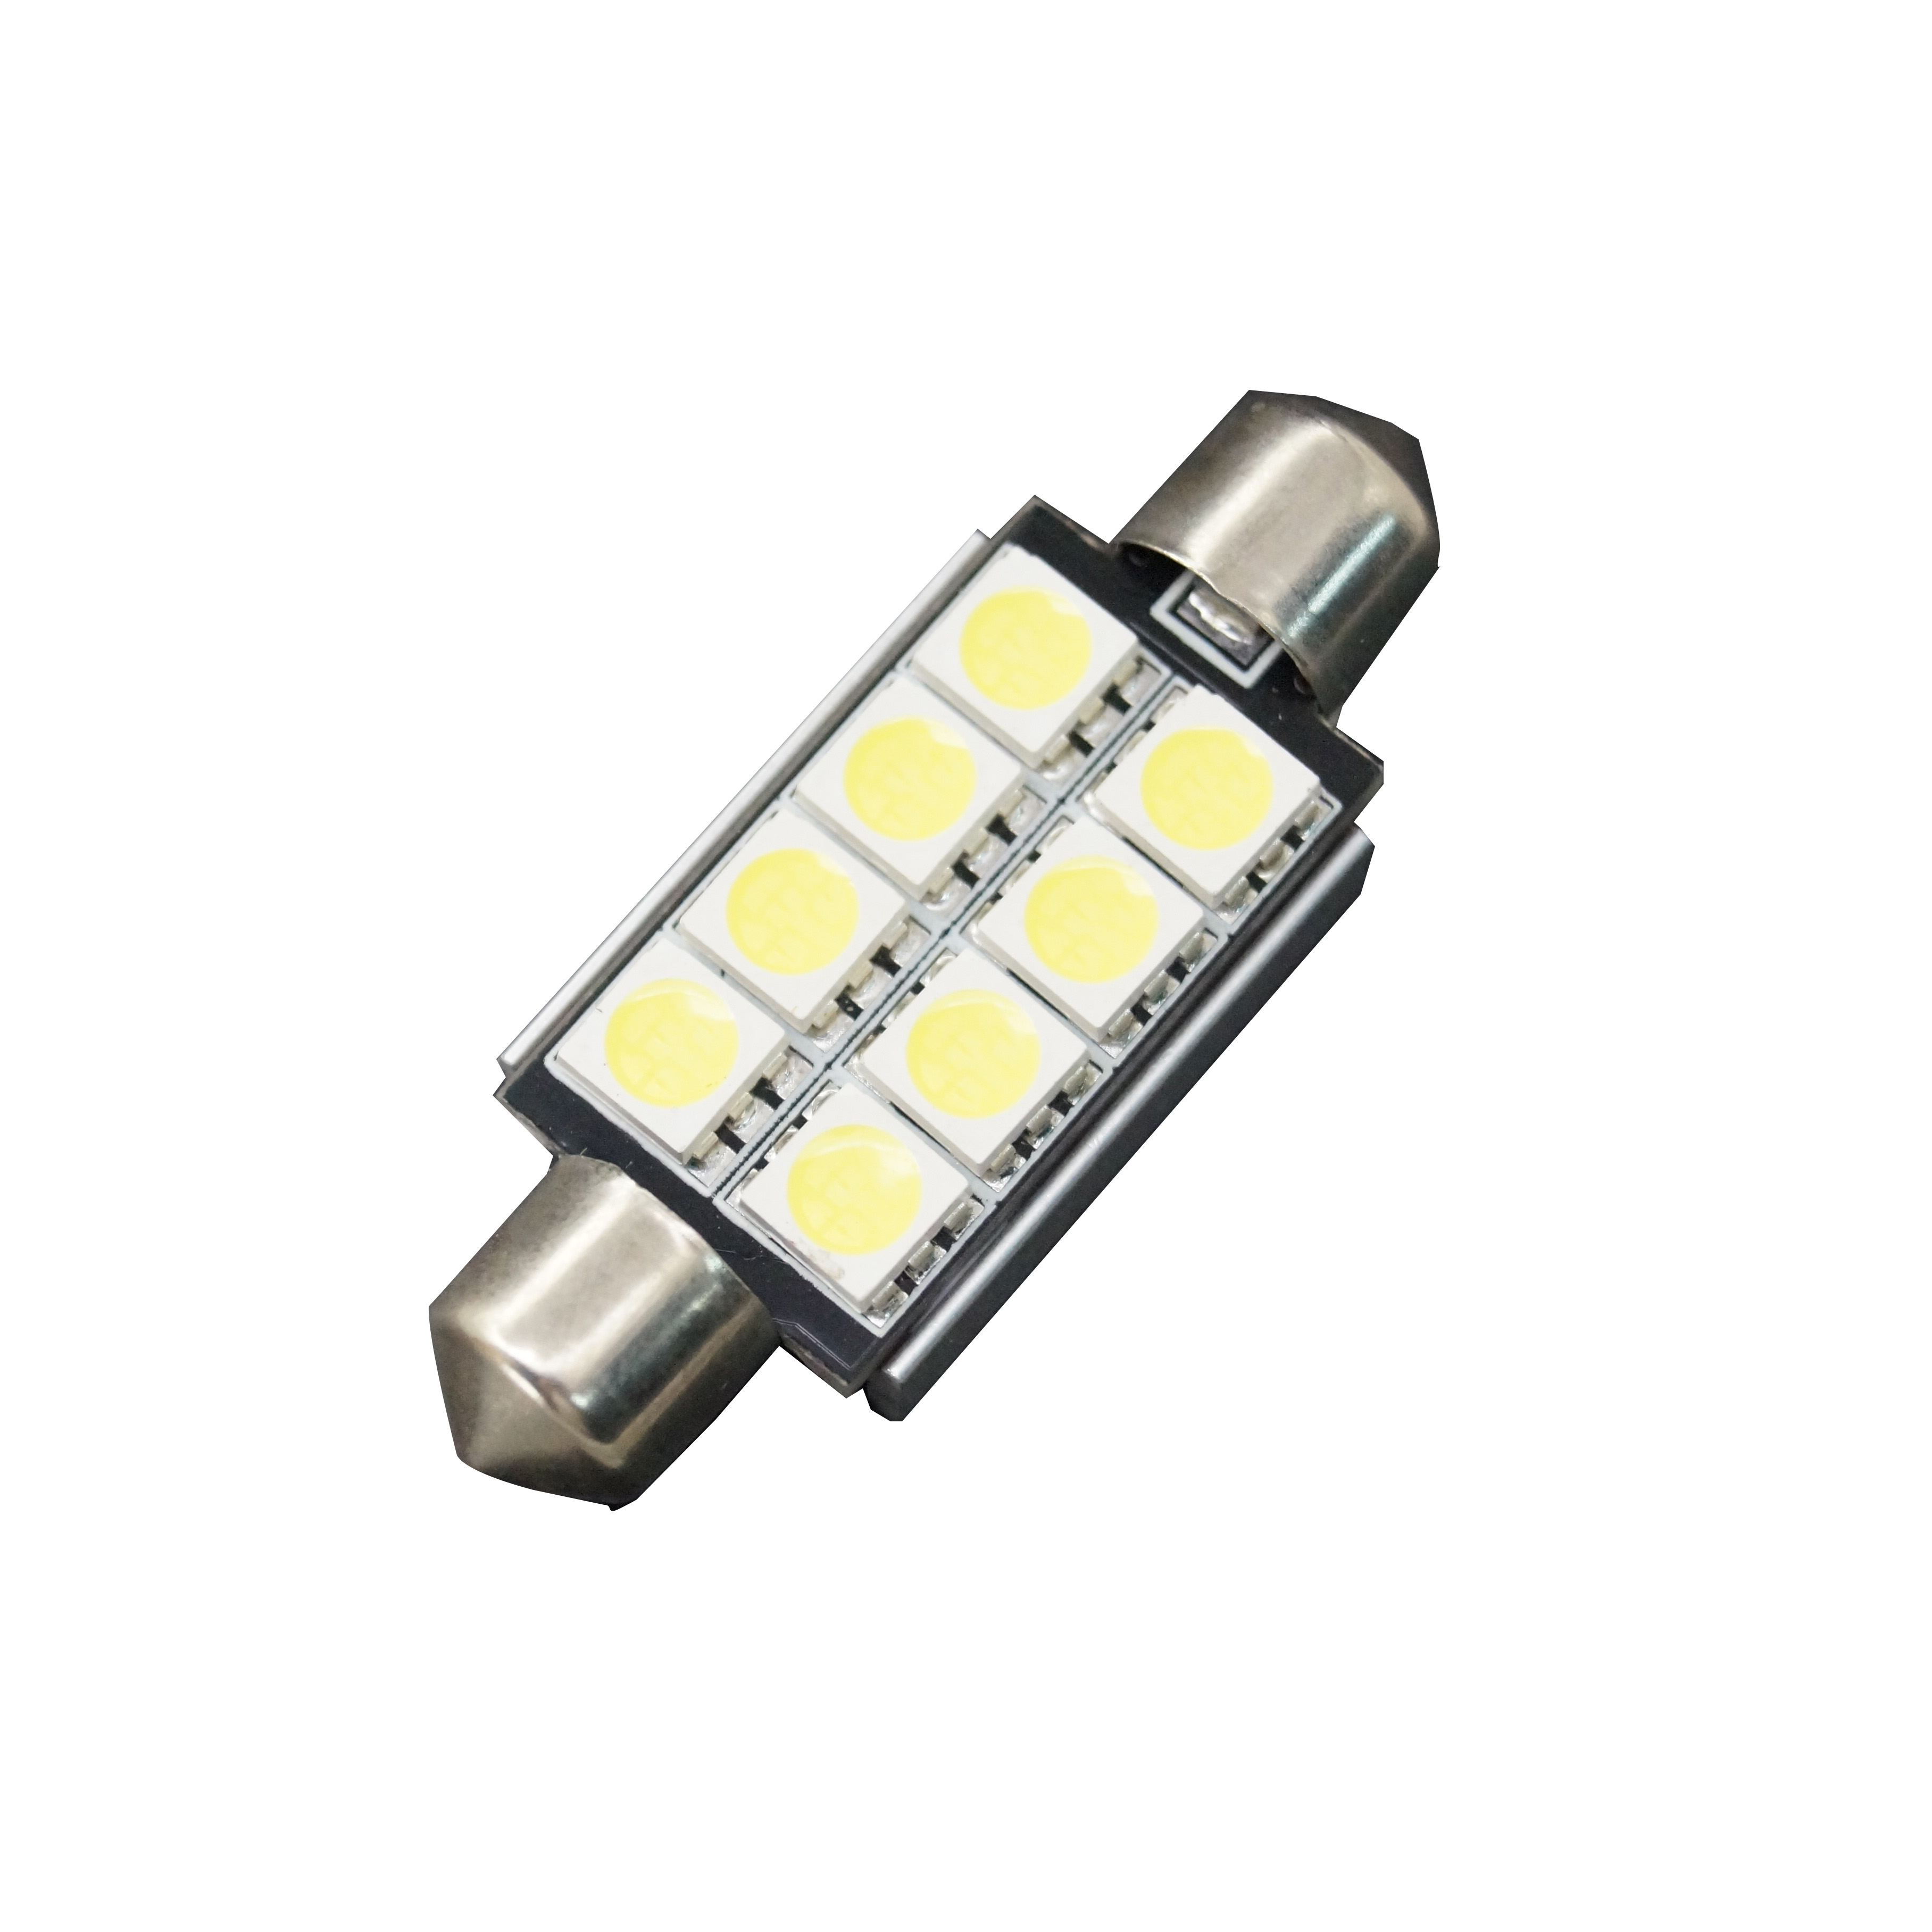 43mm Canbus Interior Auto Light LED Dome Bulbs